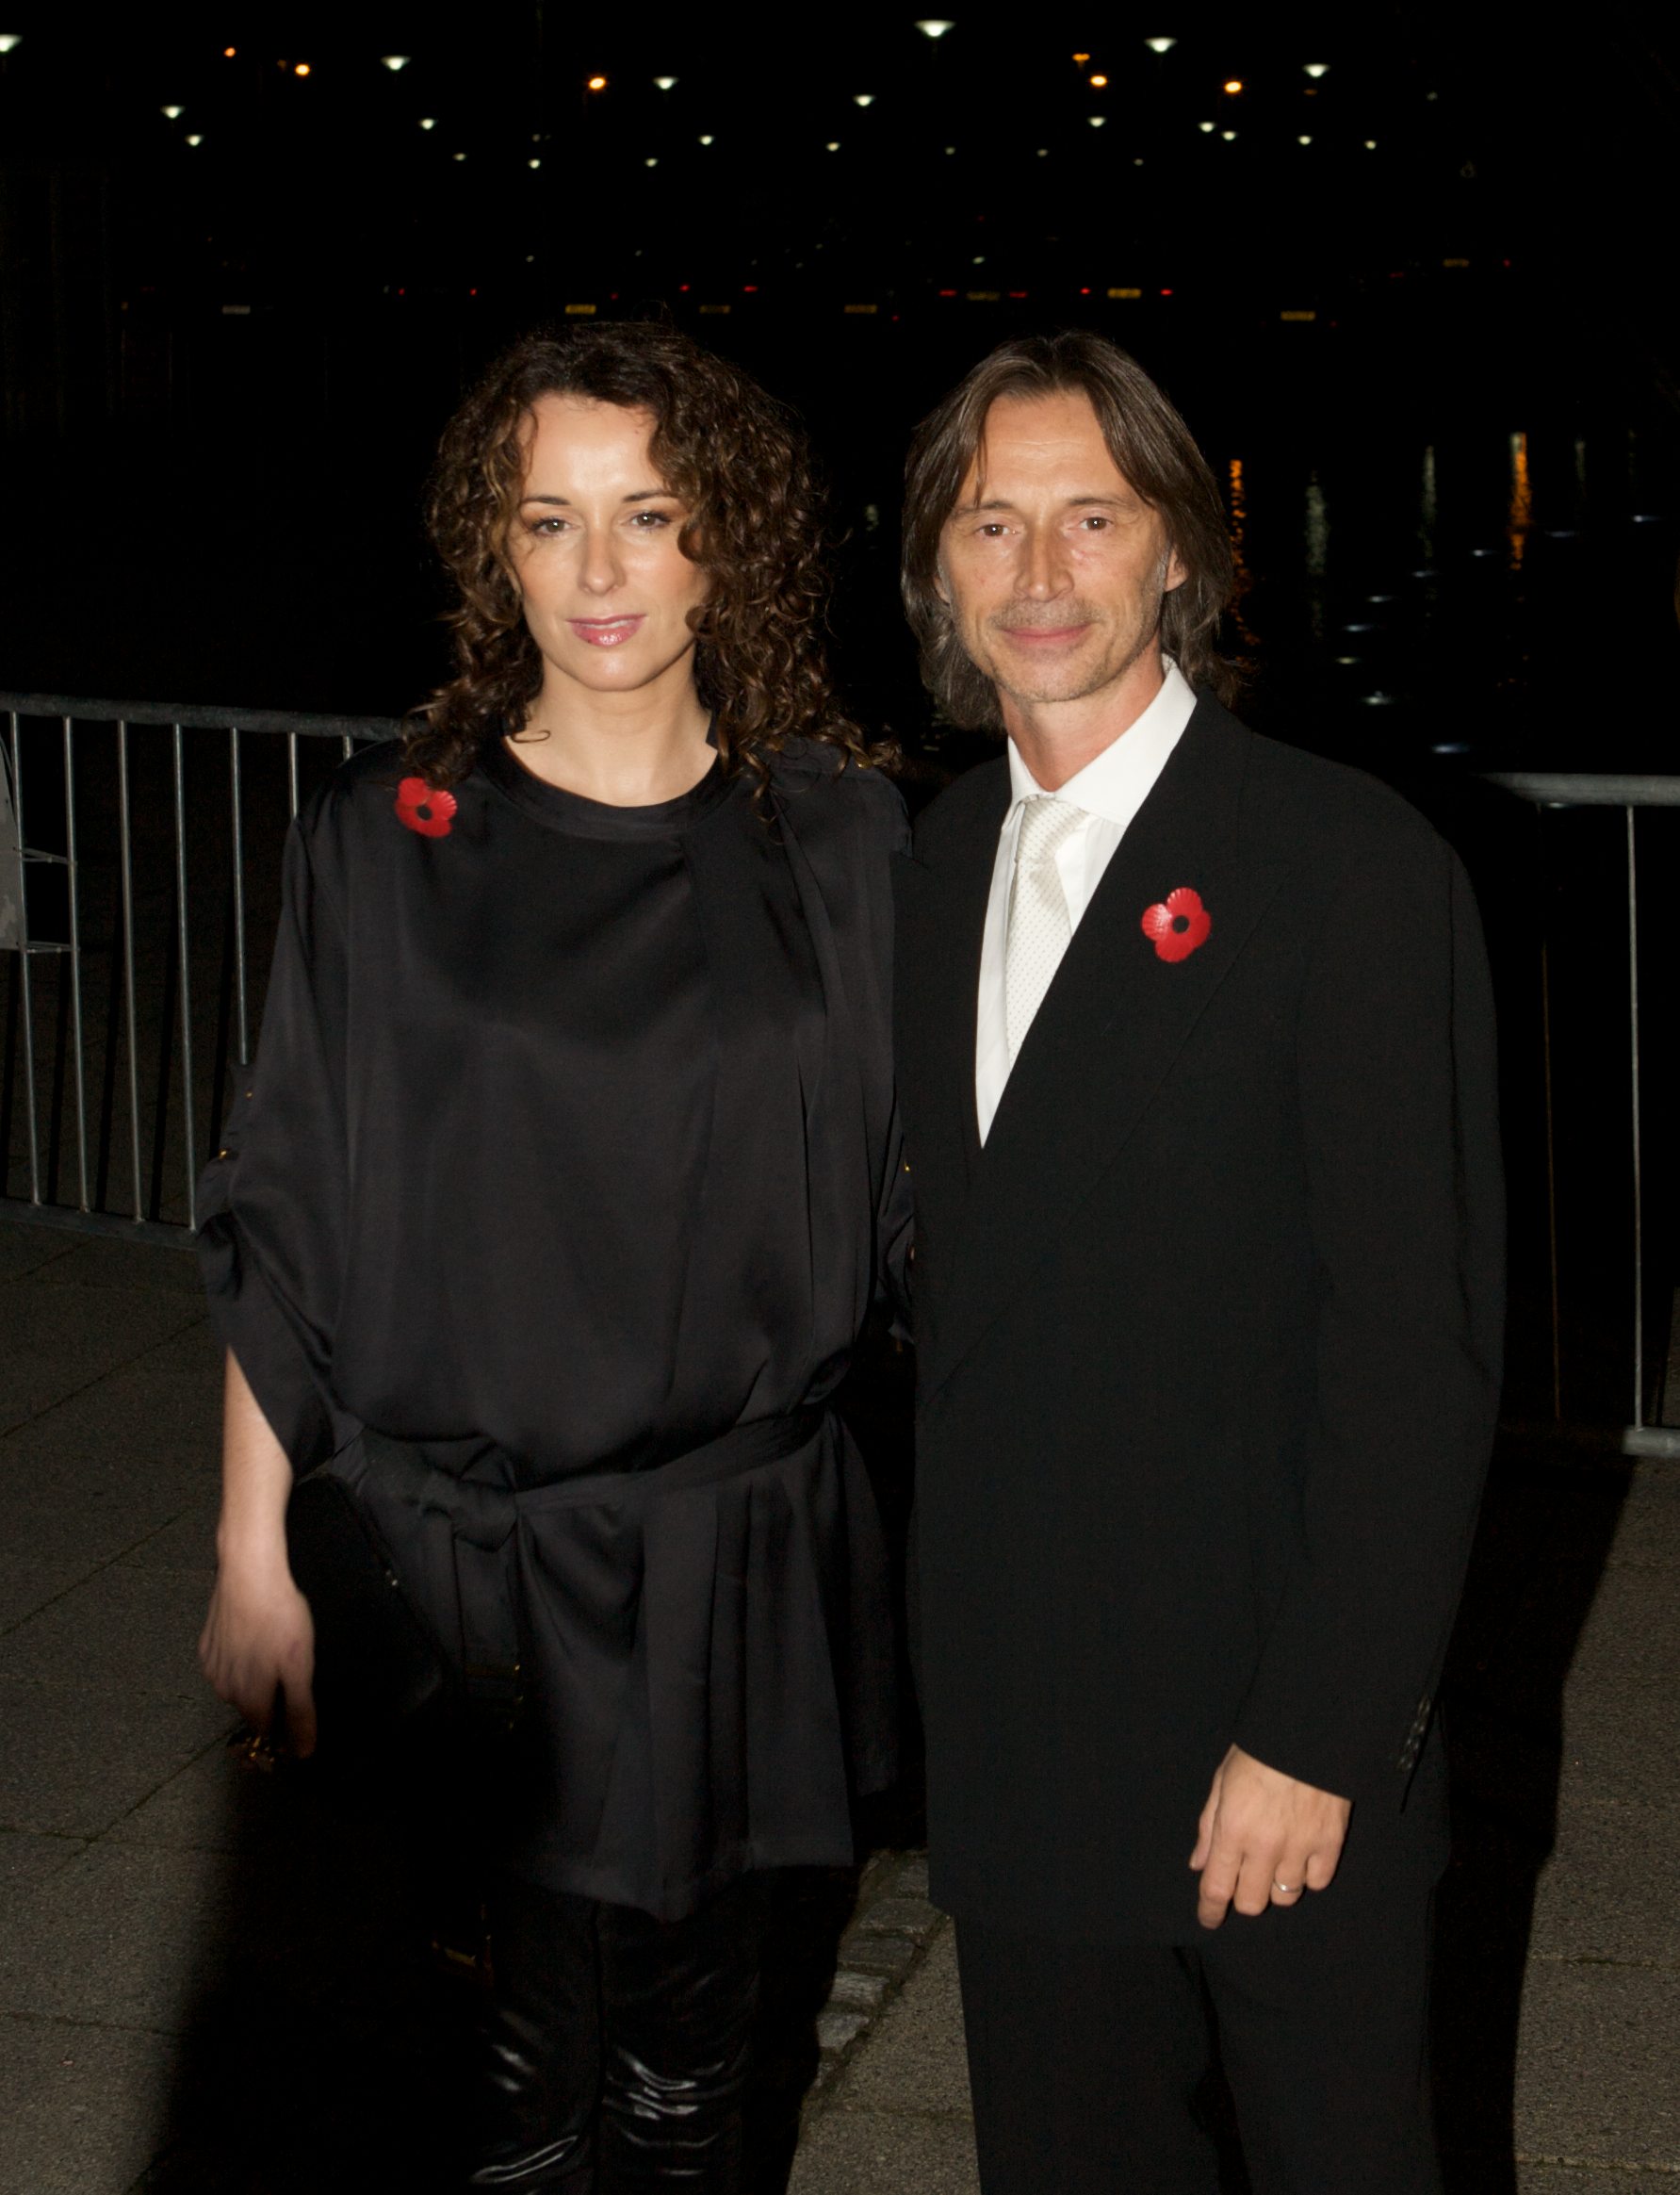 Robert Carlyle and Anastasia Shirley at the 2009 BAFTA Scotland Awards on November 8, 2008, in Glasgow, Scotland. | Source: Getty Images